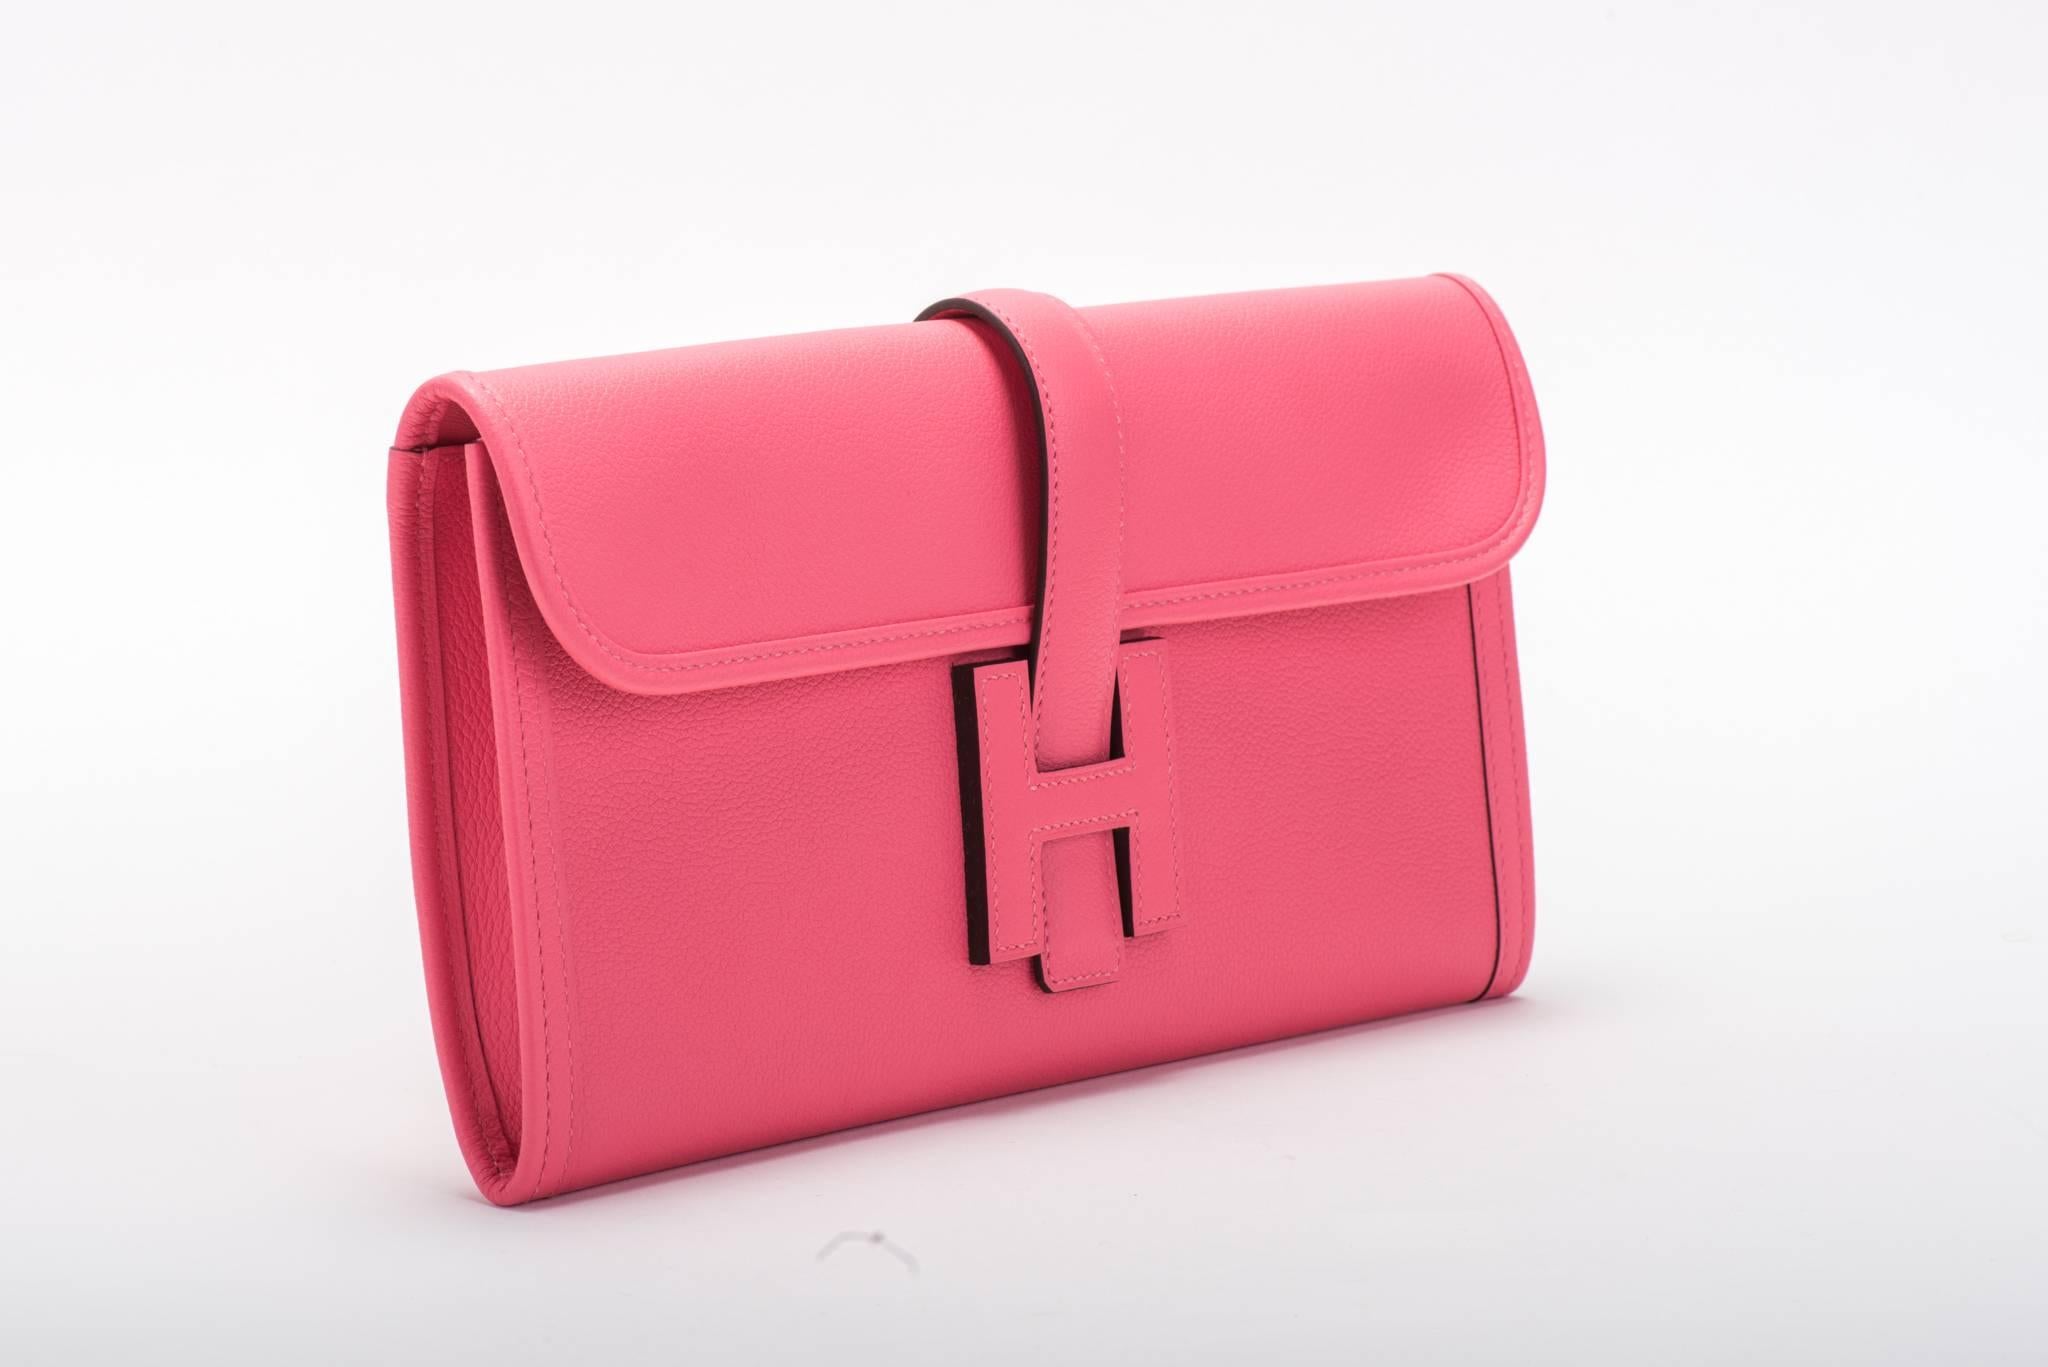 New in the box, Hermes  jige elan 29cm in brand new color rose azalee in swift leather. Dated 